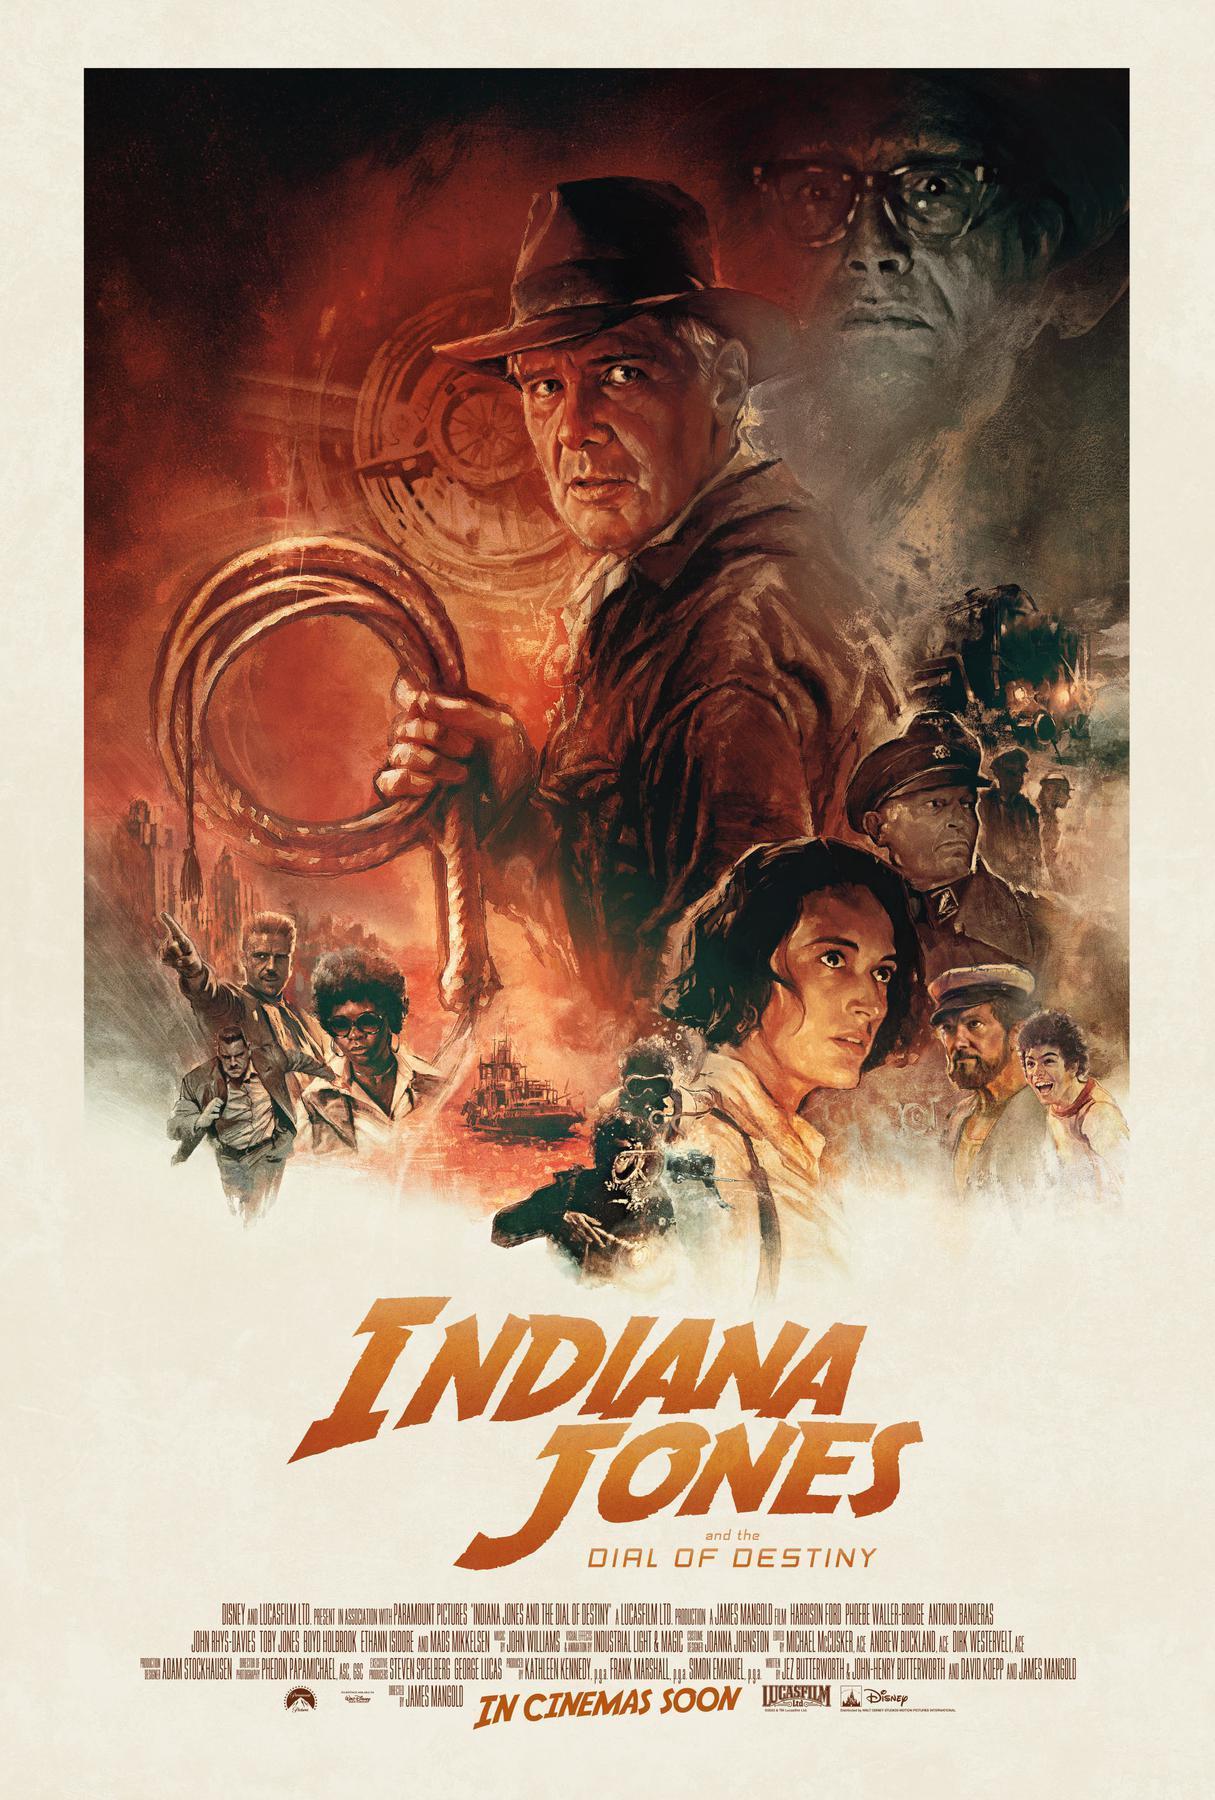 Indiana Jones and the Dial of Destiny poster.